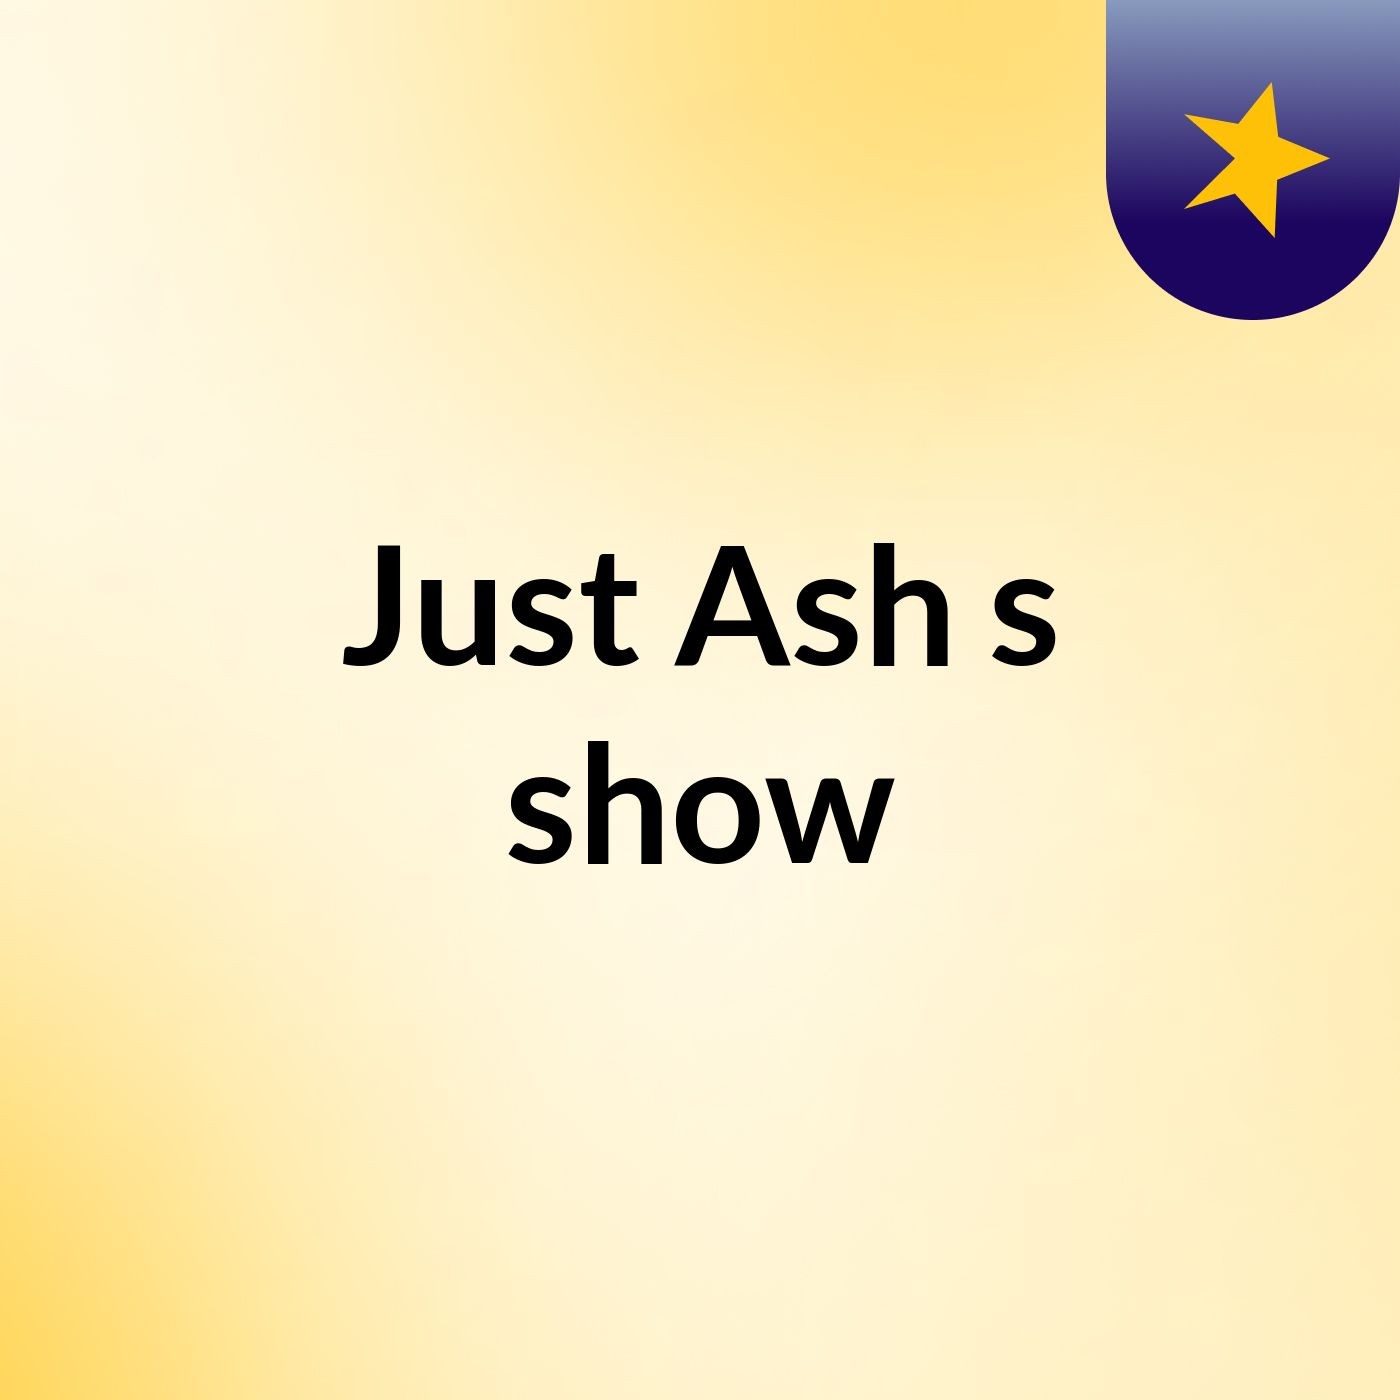 Just Ash's show